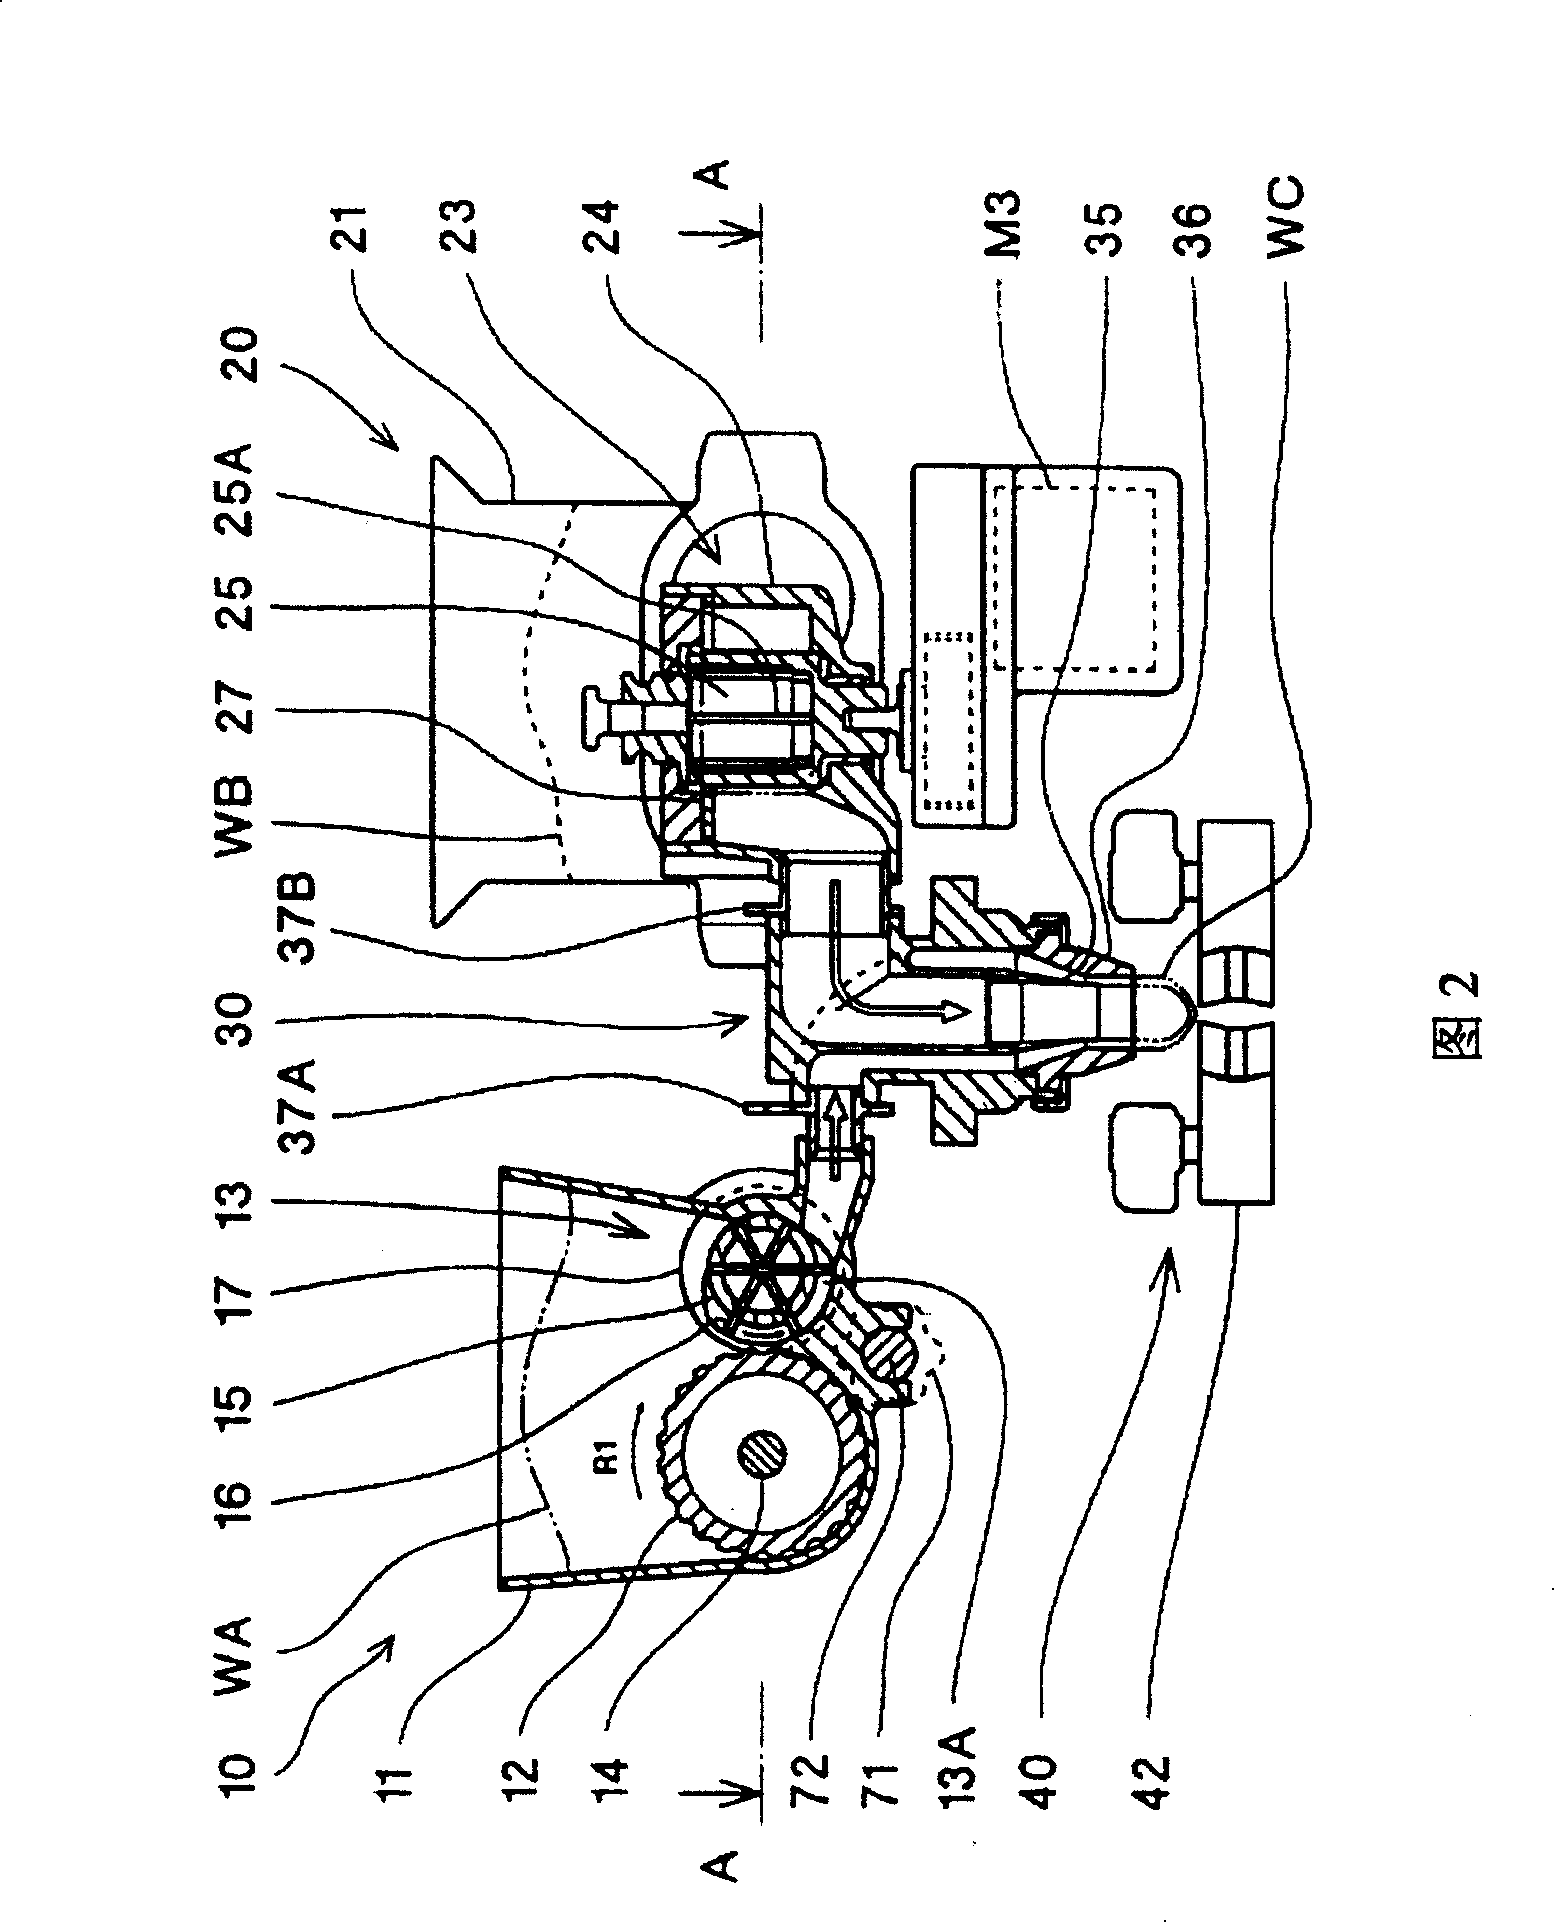 Food material supply method and device